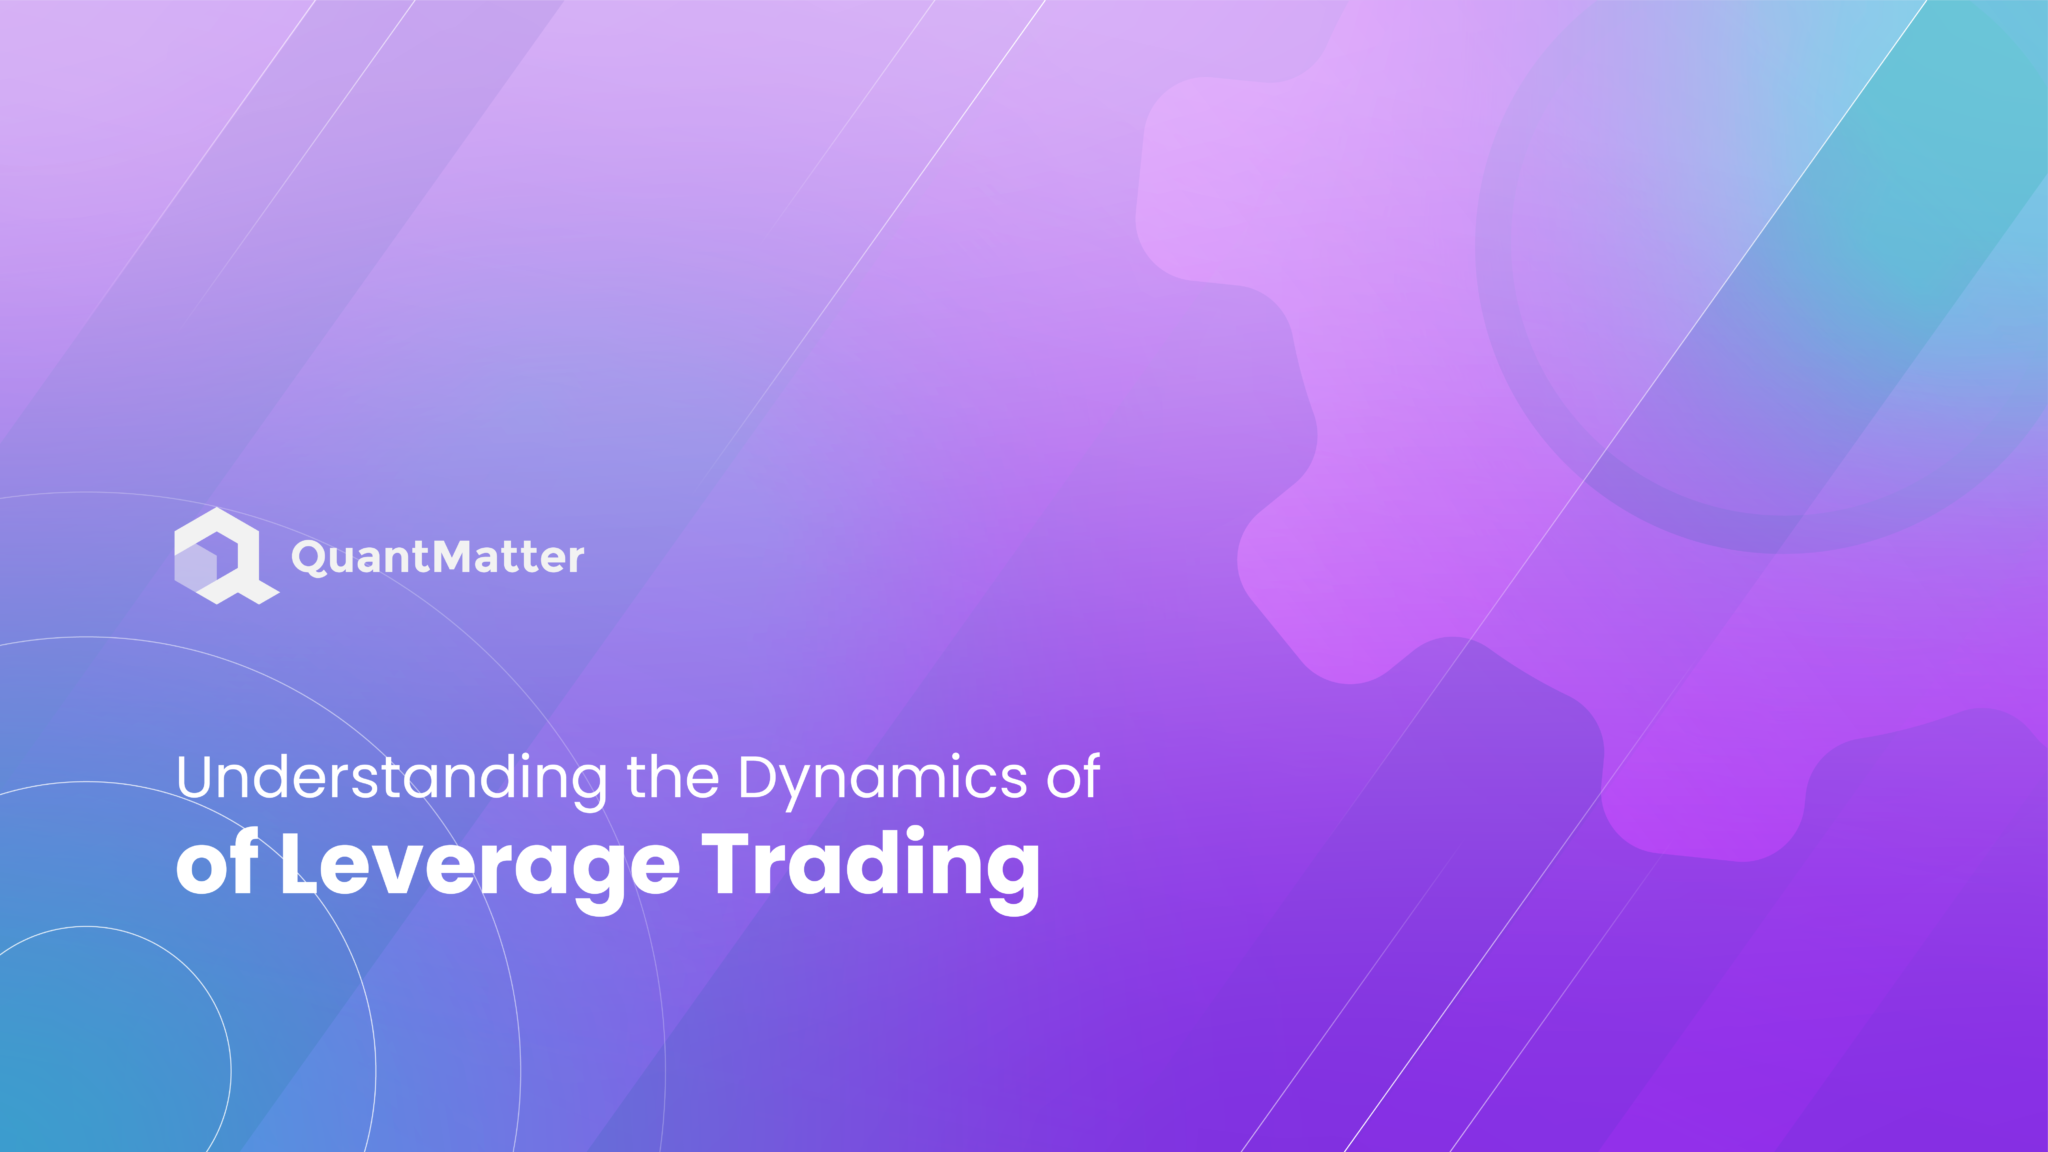 Leverage Trading: The Risk and The Mechanics Behind 